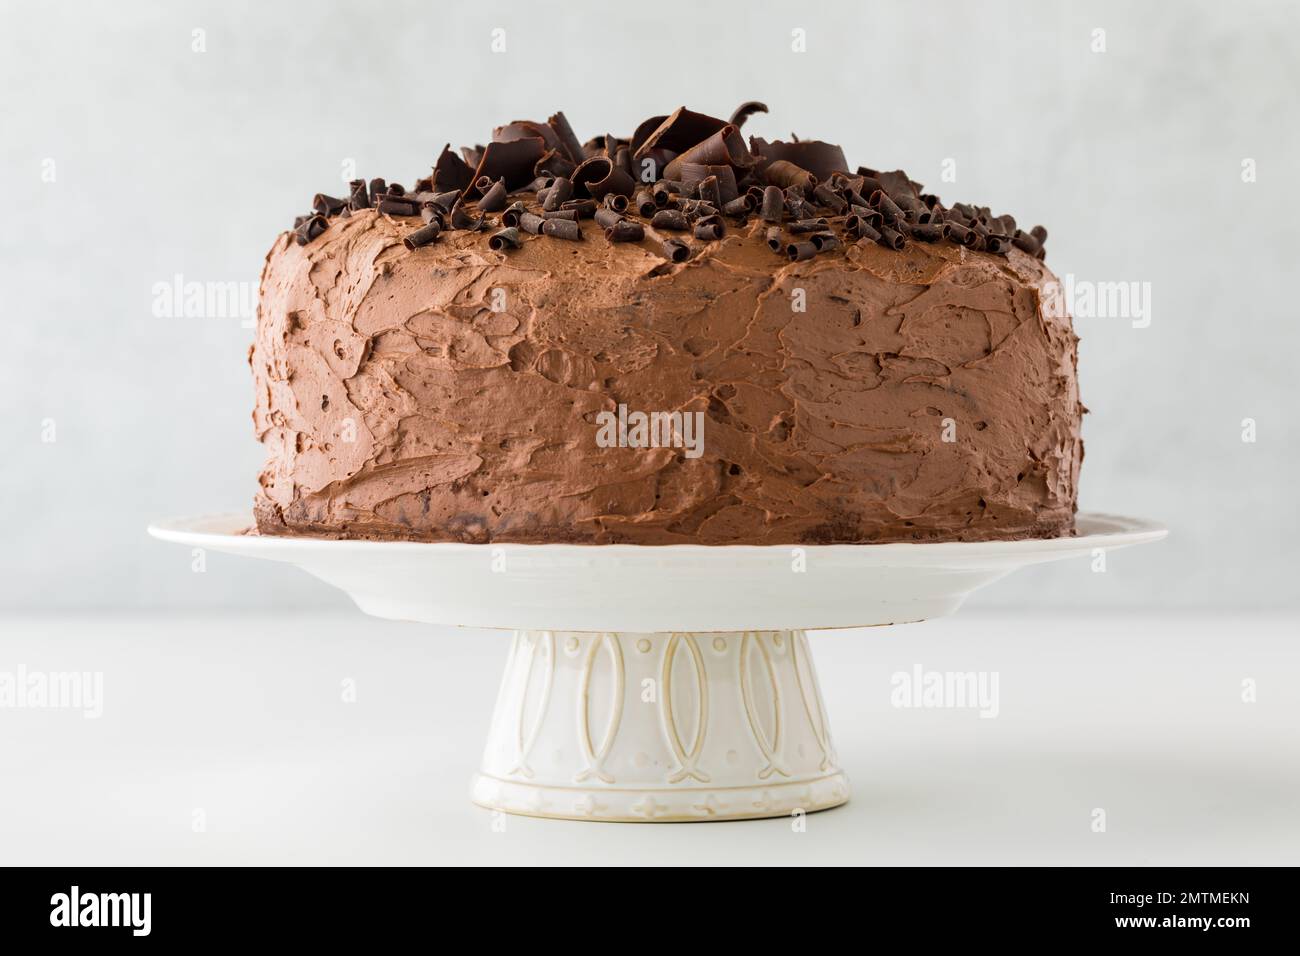 A whole triple layered low sugar chocolate cake on a pedestal stand. Stock Photo